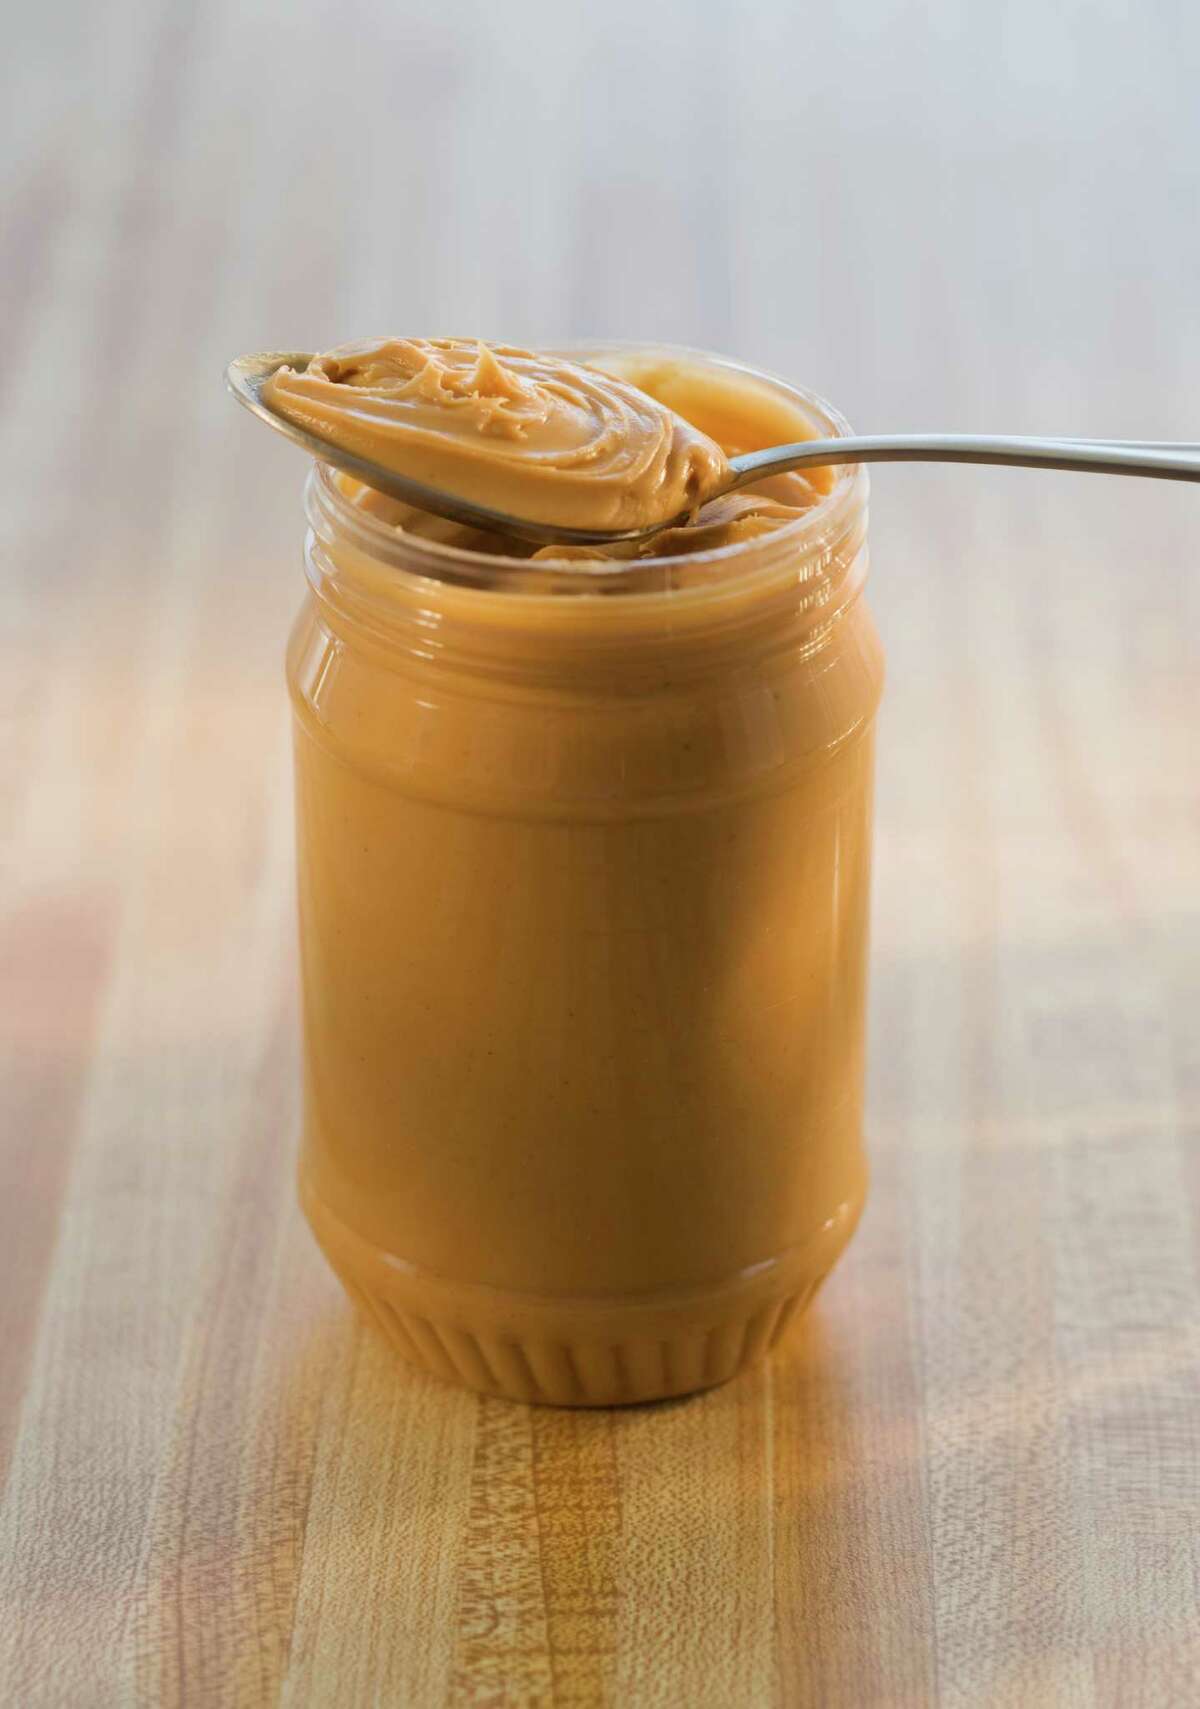 Patent Peanut butter was first patented by a Canadian, Marcellus Gilmore Edson, in 1884.